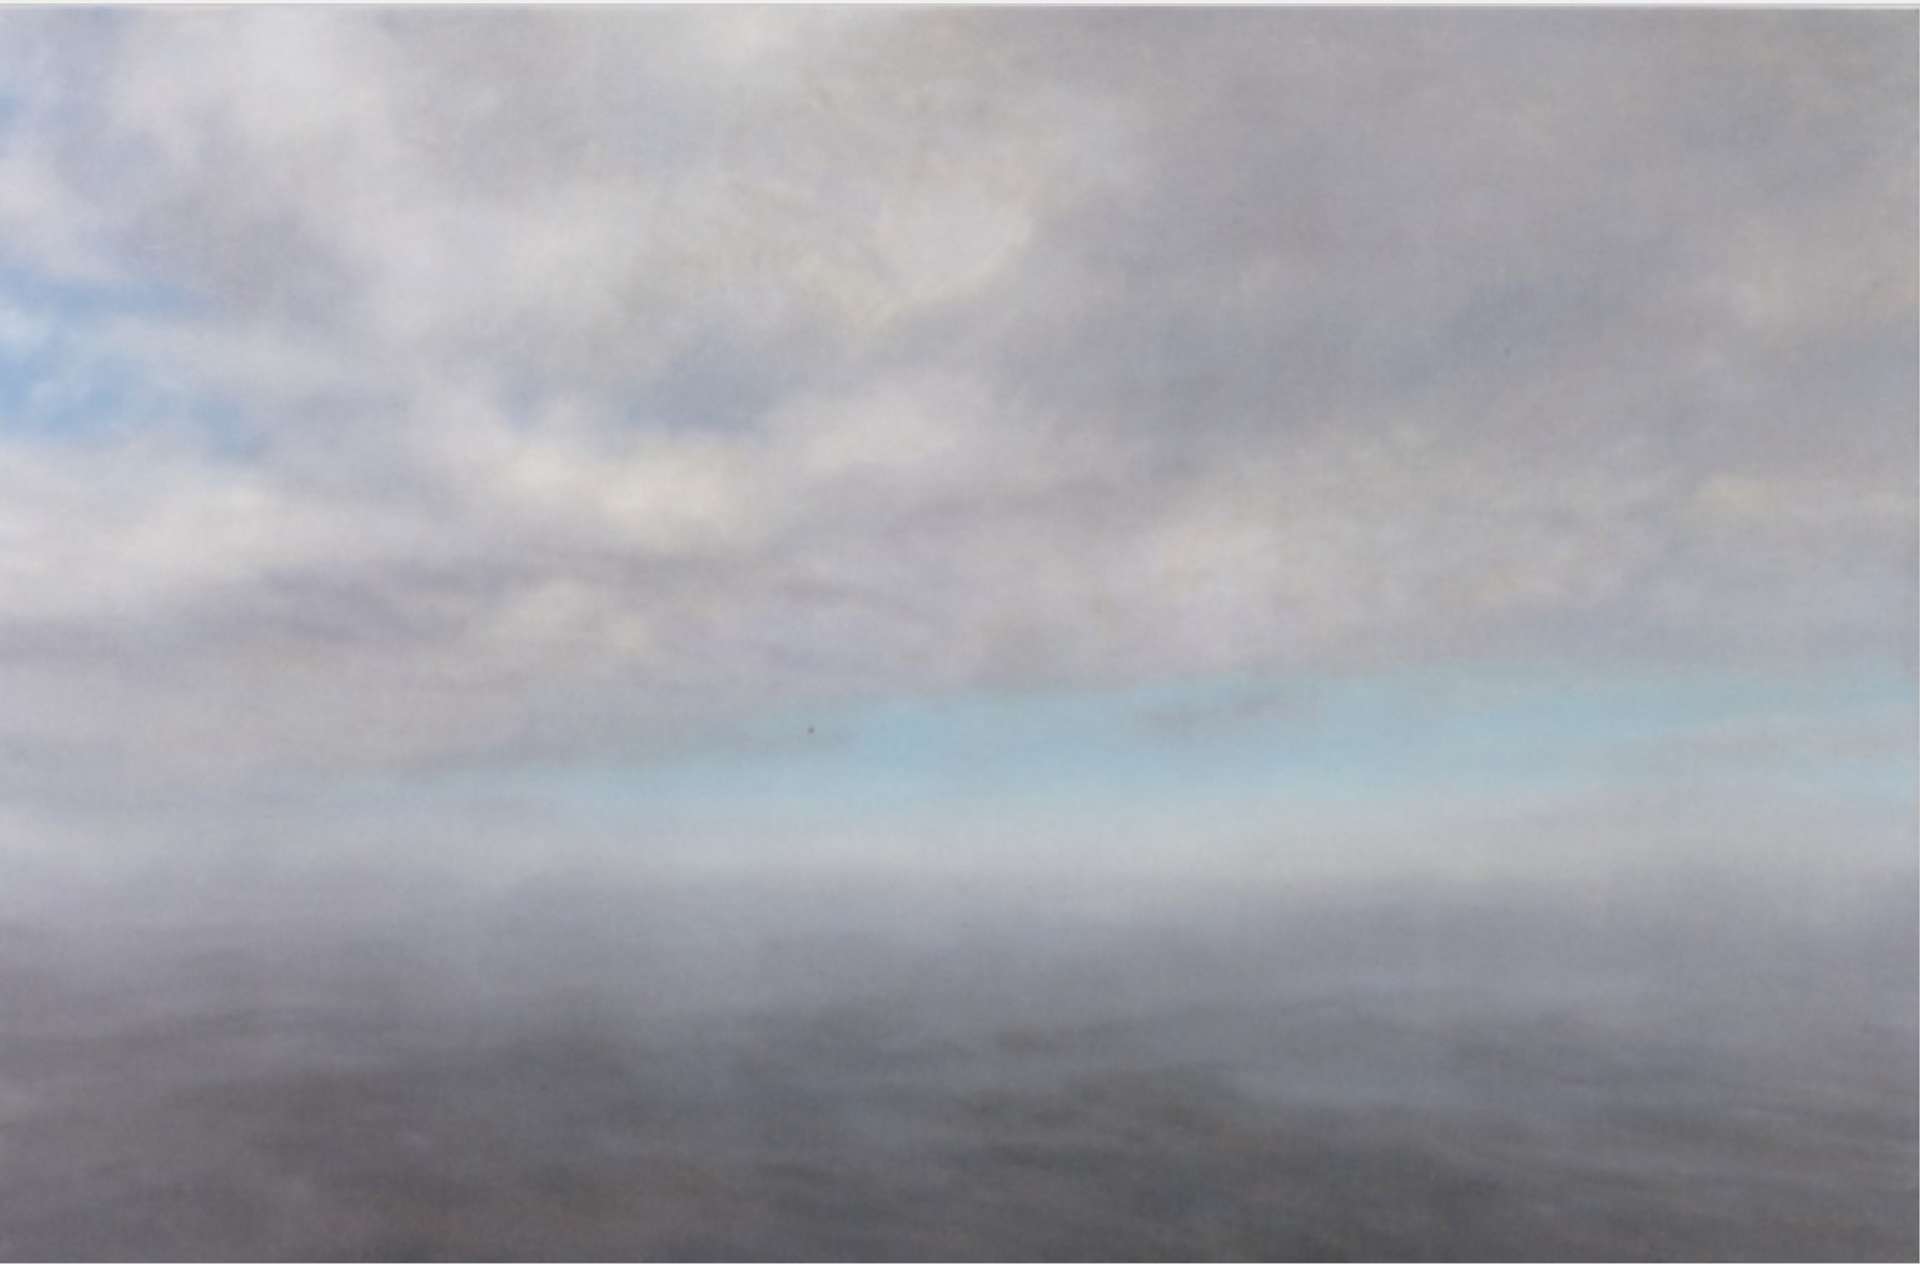 Painting by Gerhard Richter depicting a cloudy, blurred seascape. A pale blue sky pokes through behind the grey clouds.